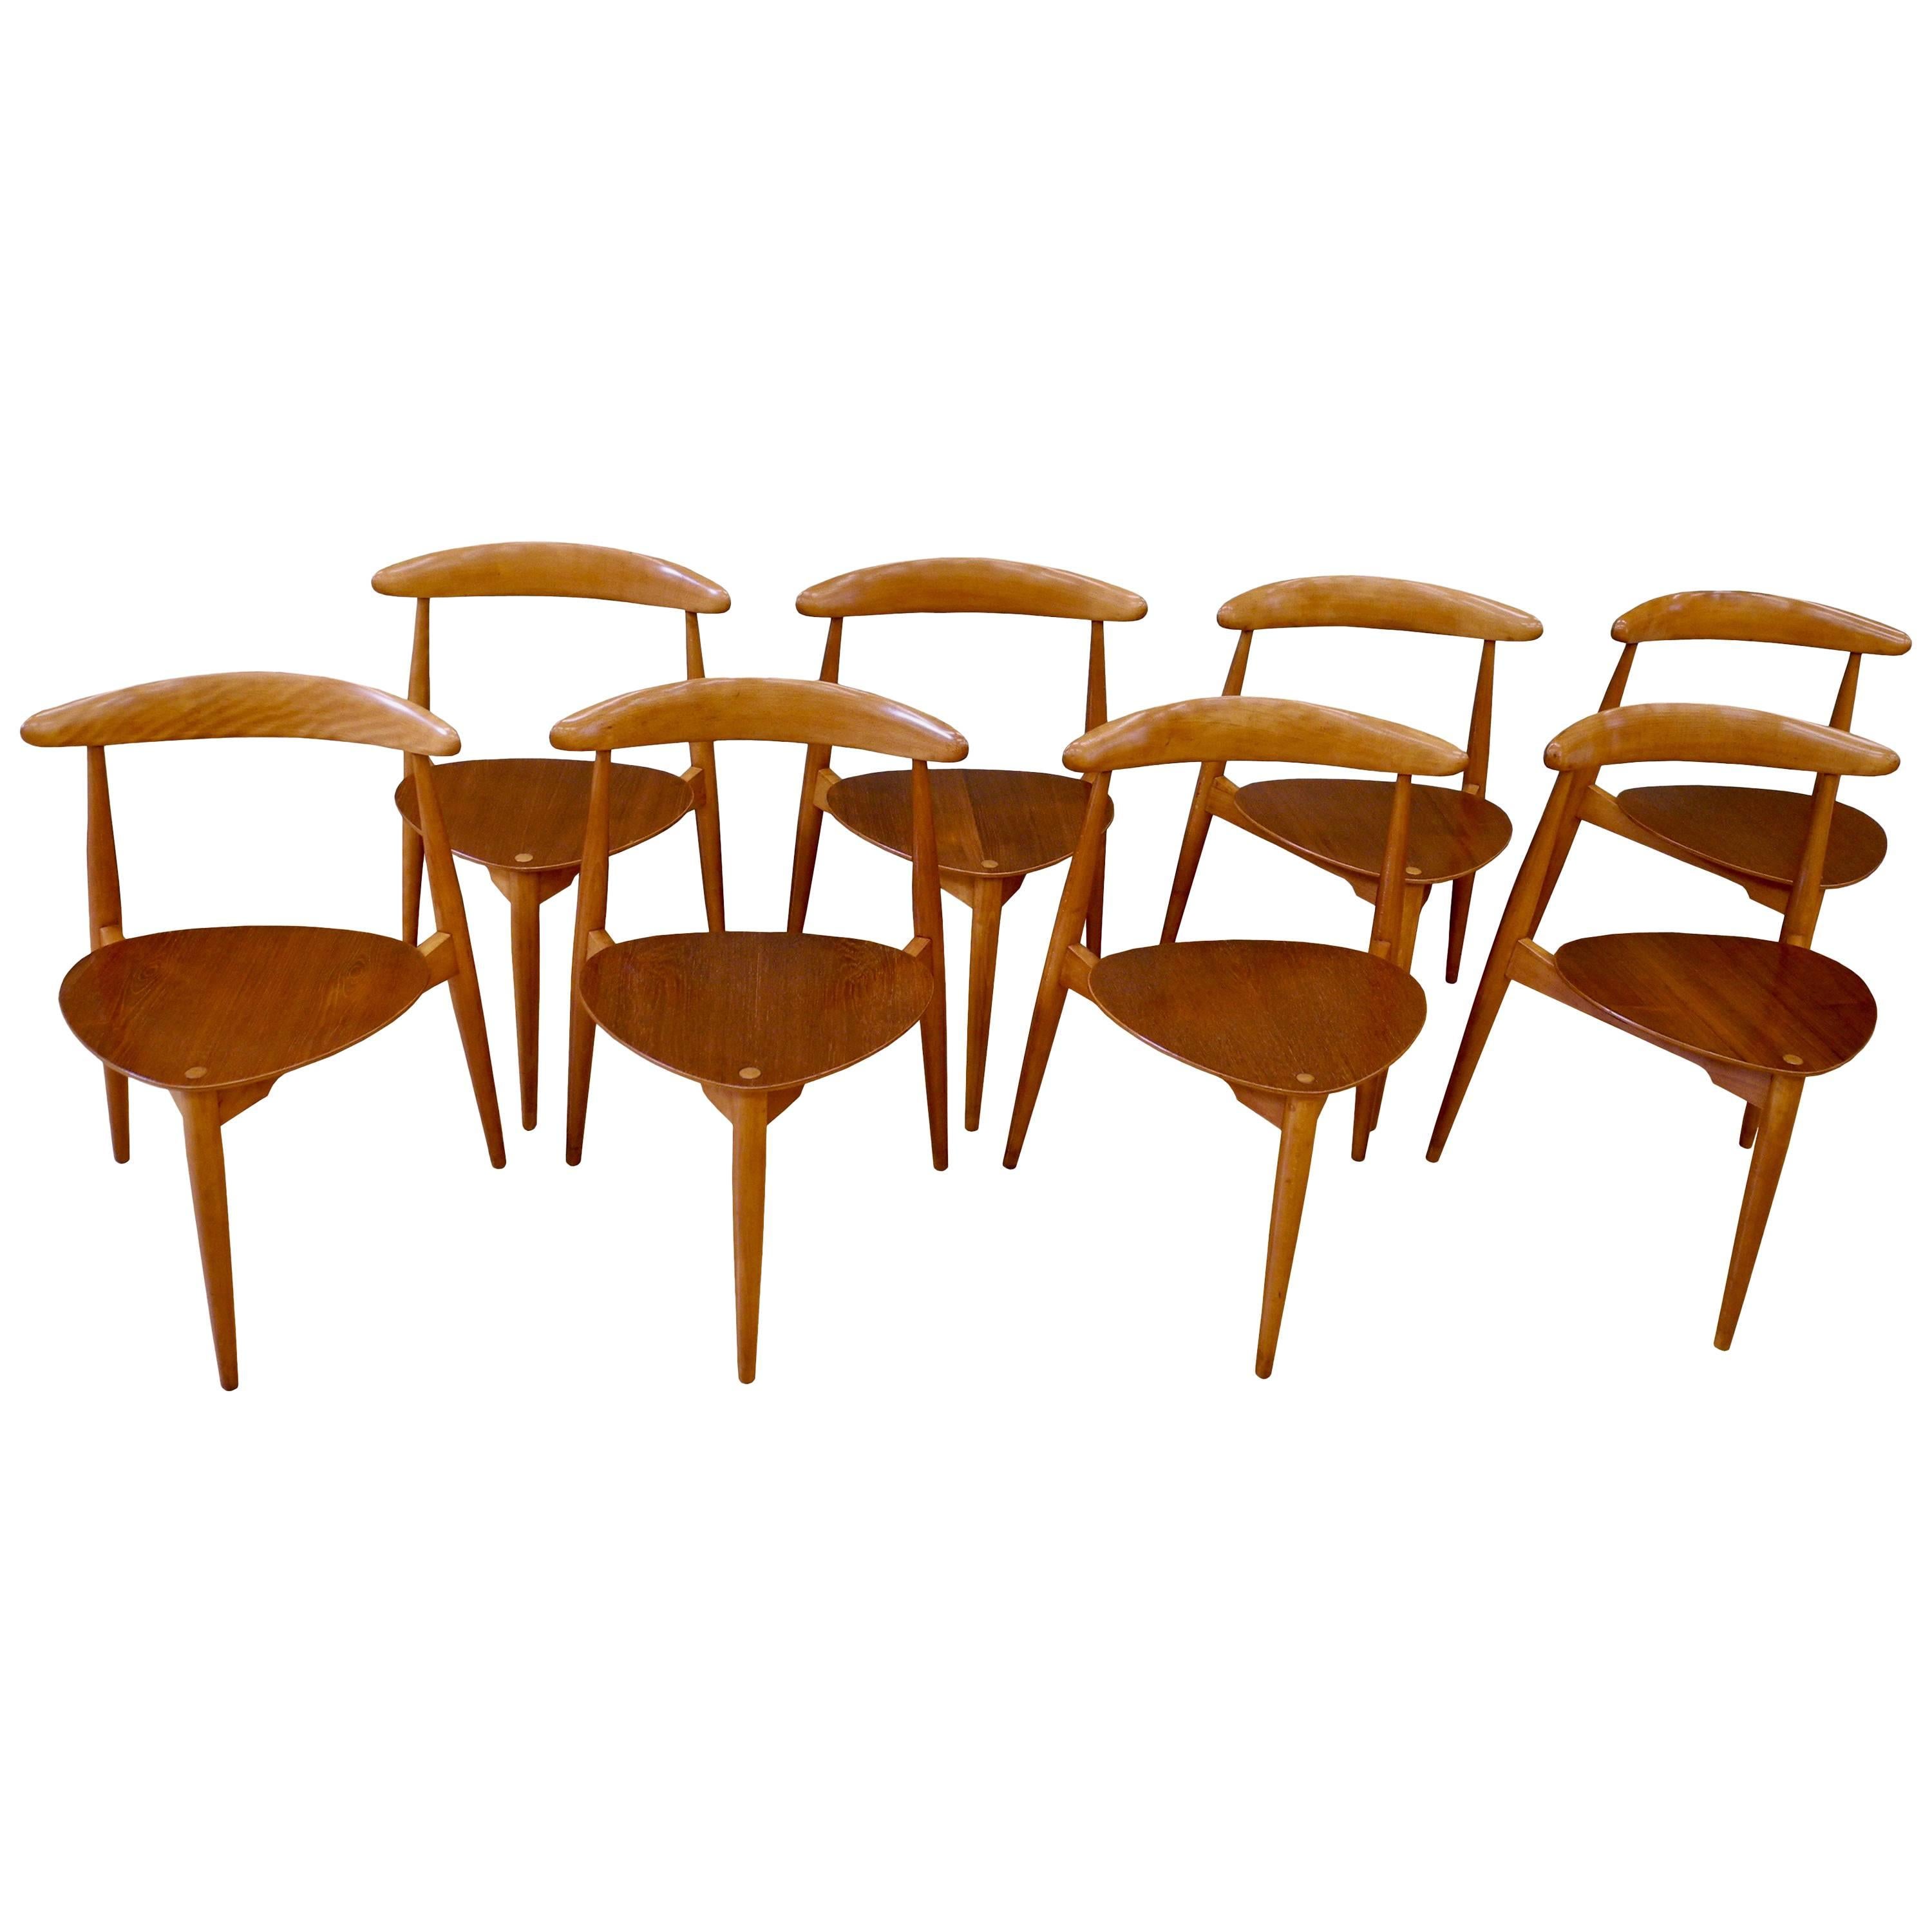 Eight Danish Modern Heart Chairs in Teak and Beech by Hans Wegner For Sale